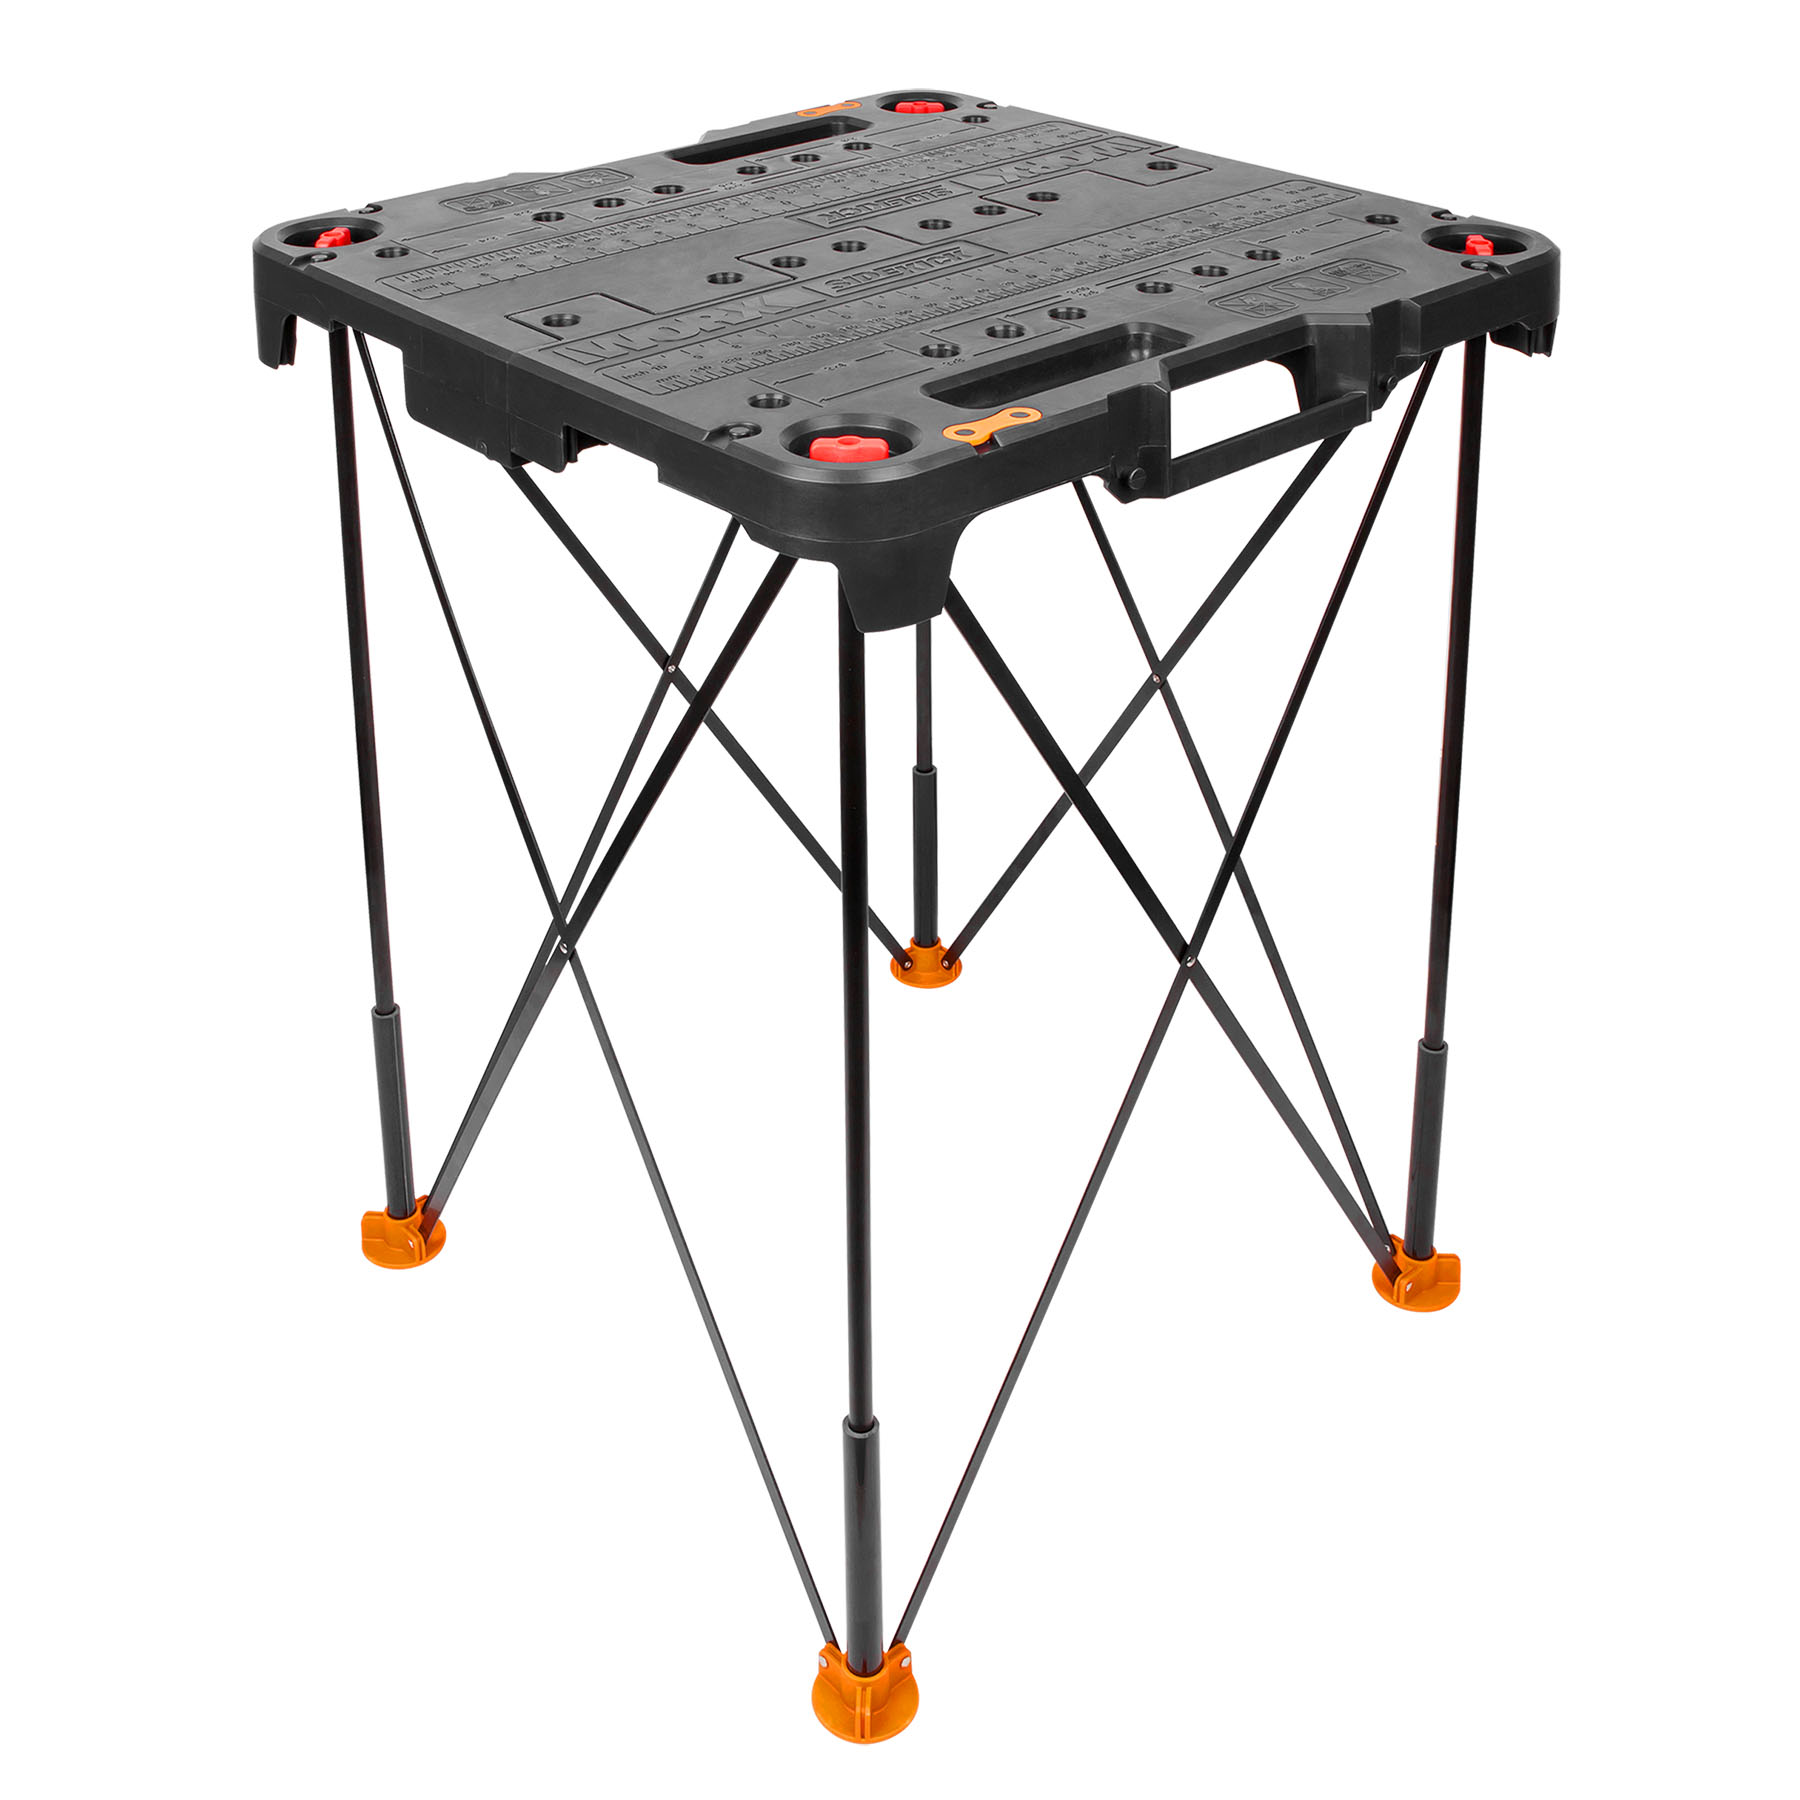 Sidekick is a portable, 24 in. by 24 in. worktable that sets up in seconds.